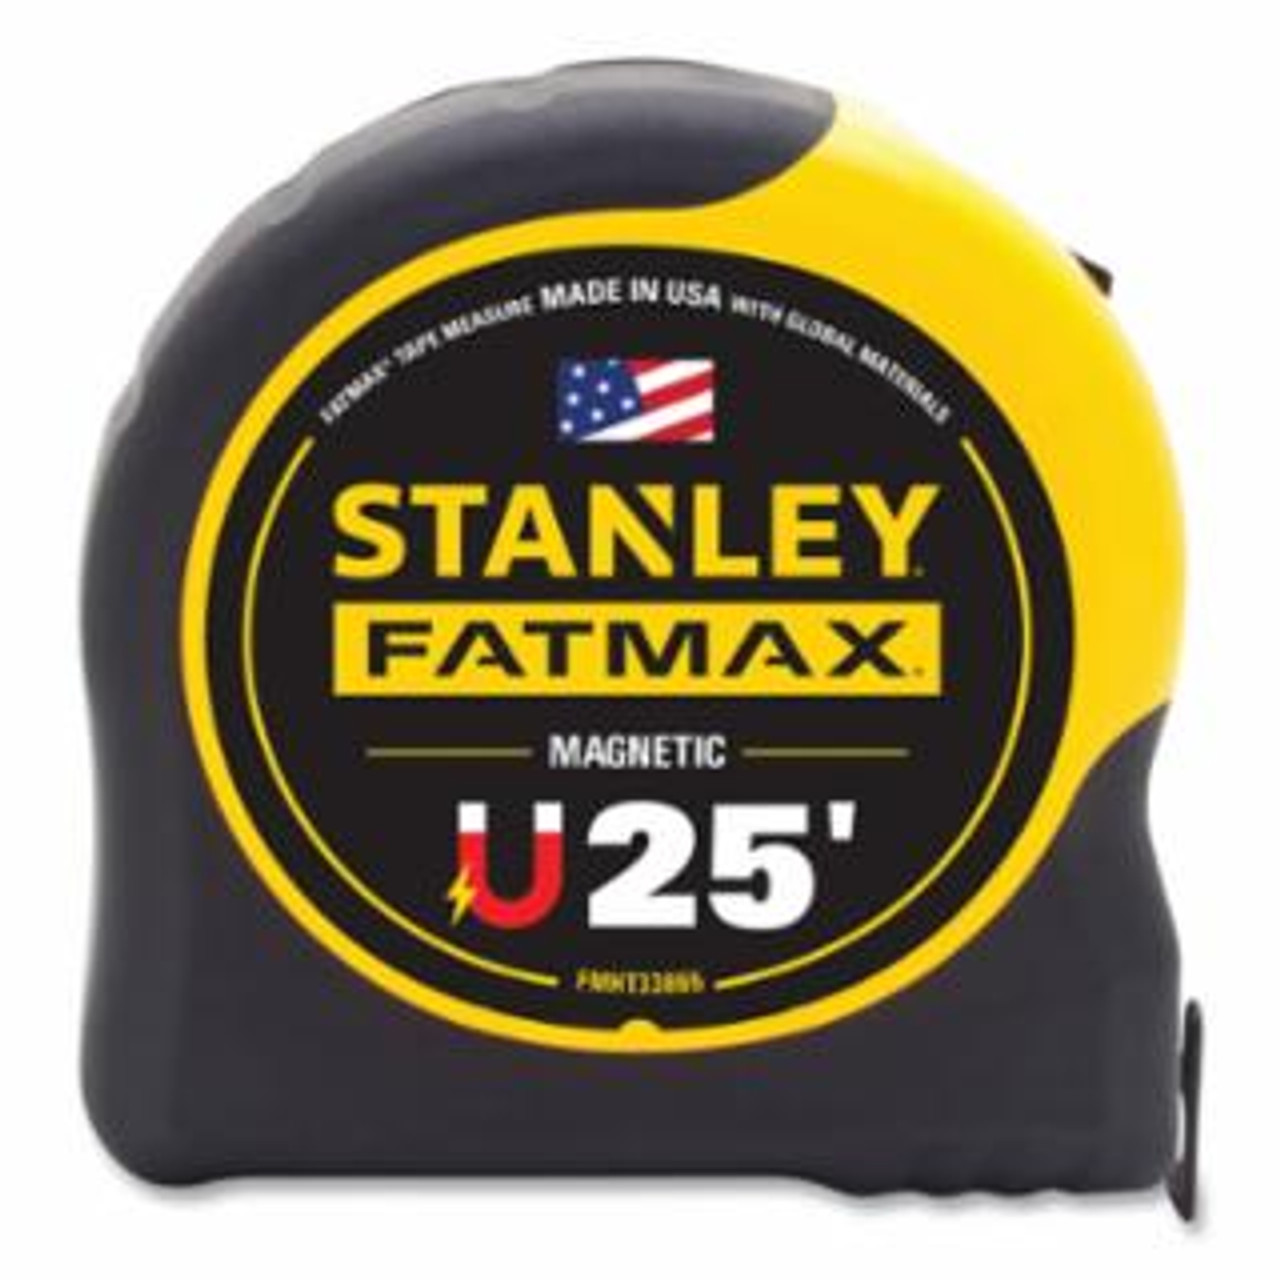 FatMax Magnetic Tape Measure, 25 ft x 1-1/4 in, SAE, Yellow/Black (FMHT33865L)